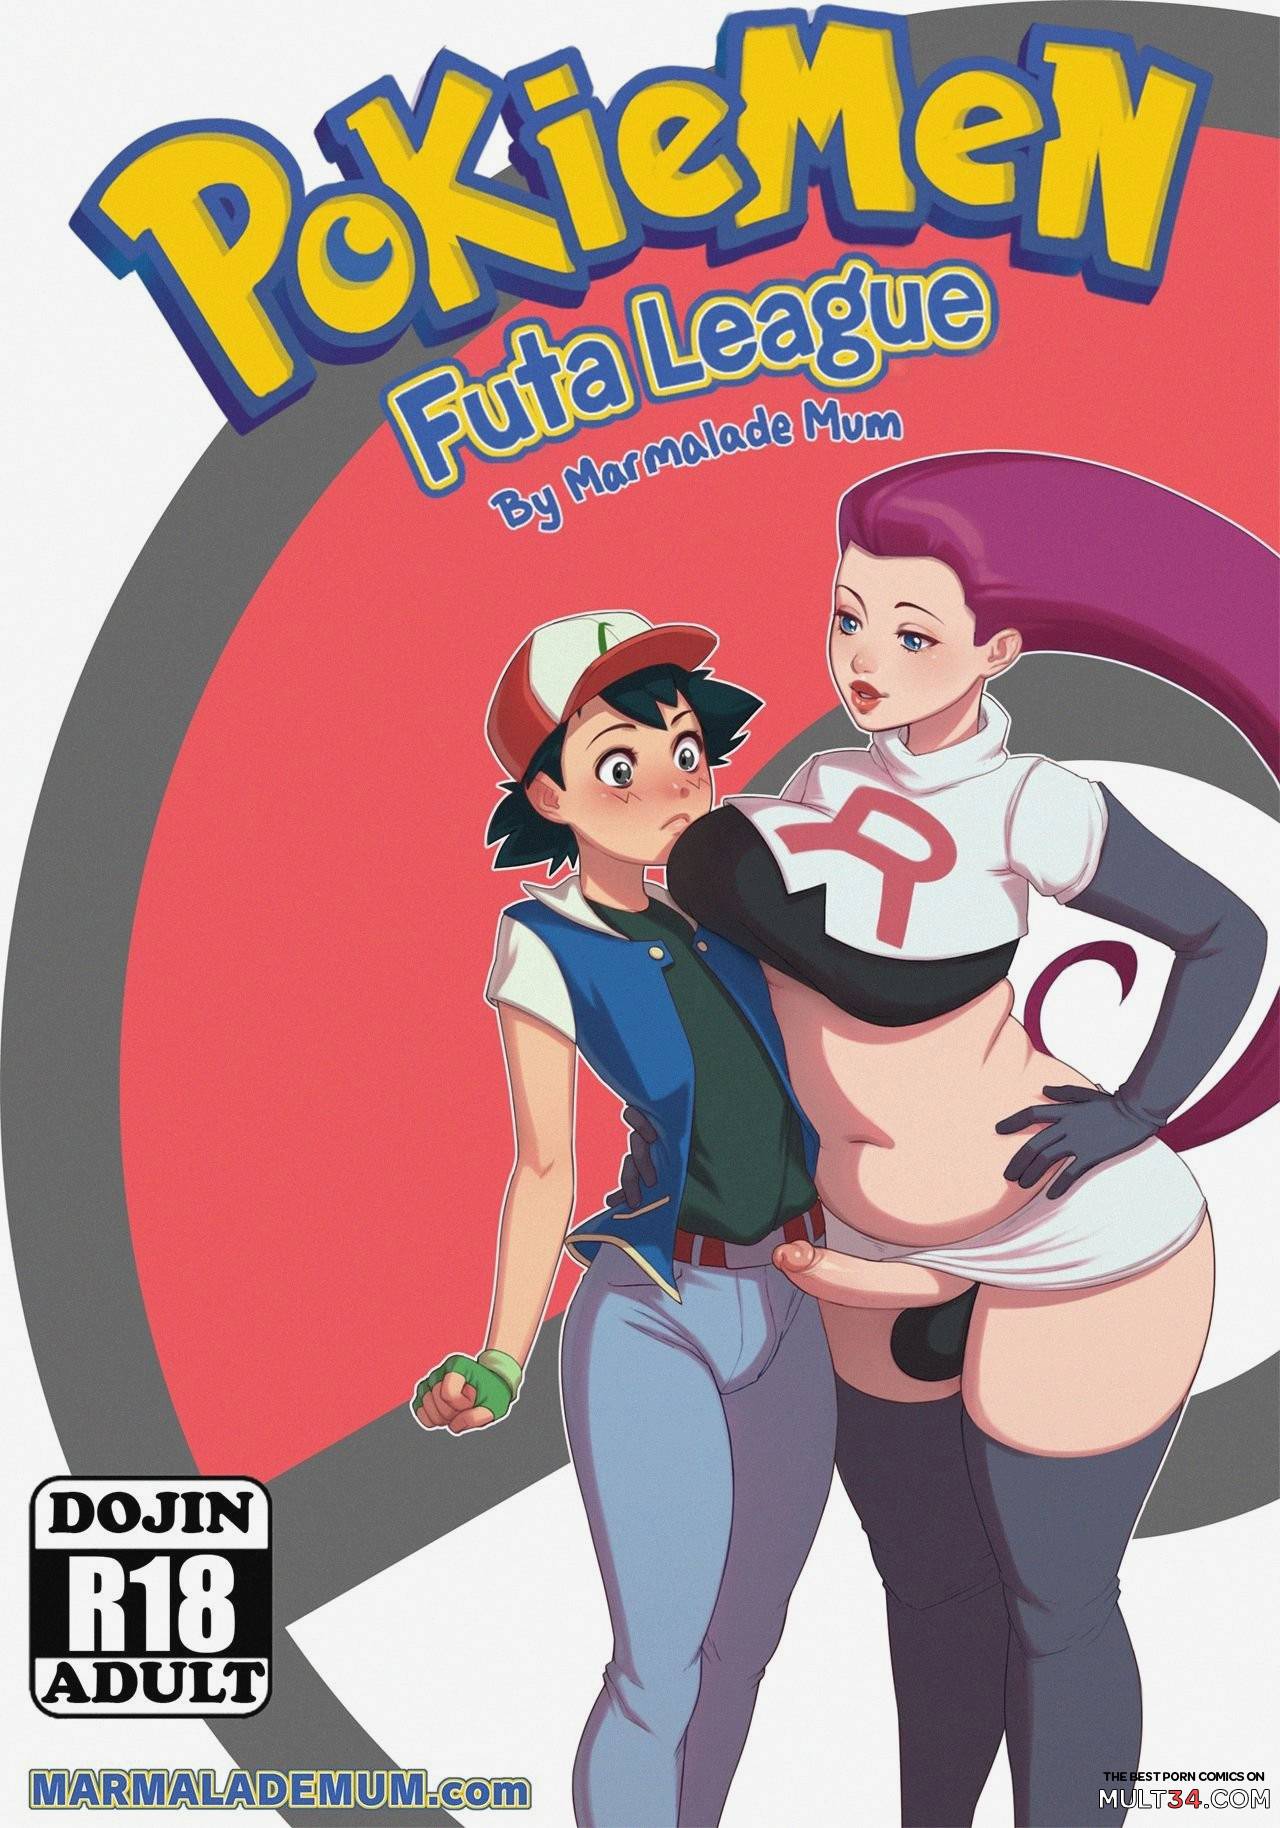 Ditto x Pokemon Rule 34 at Its Finest: Come and Experience the Magic!